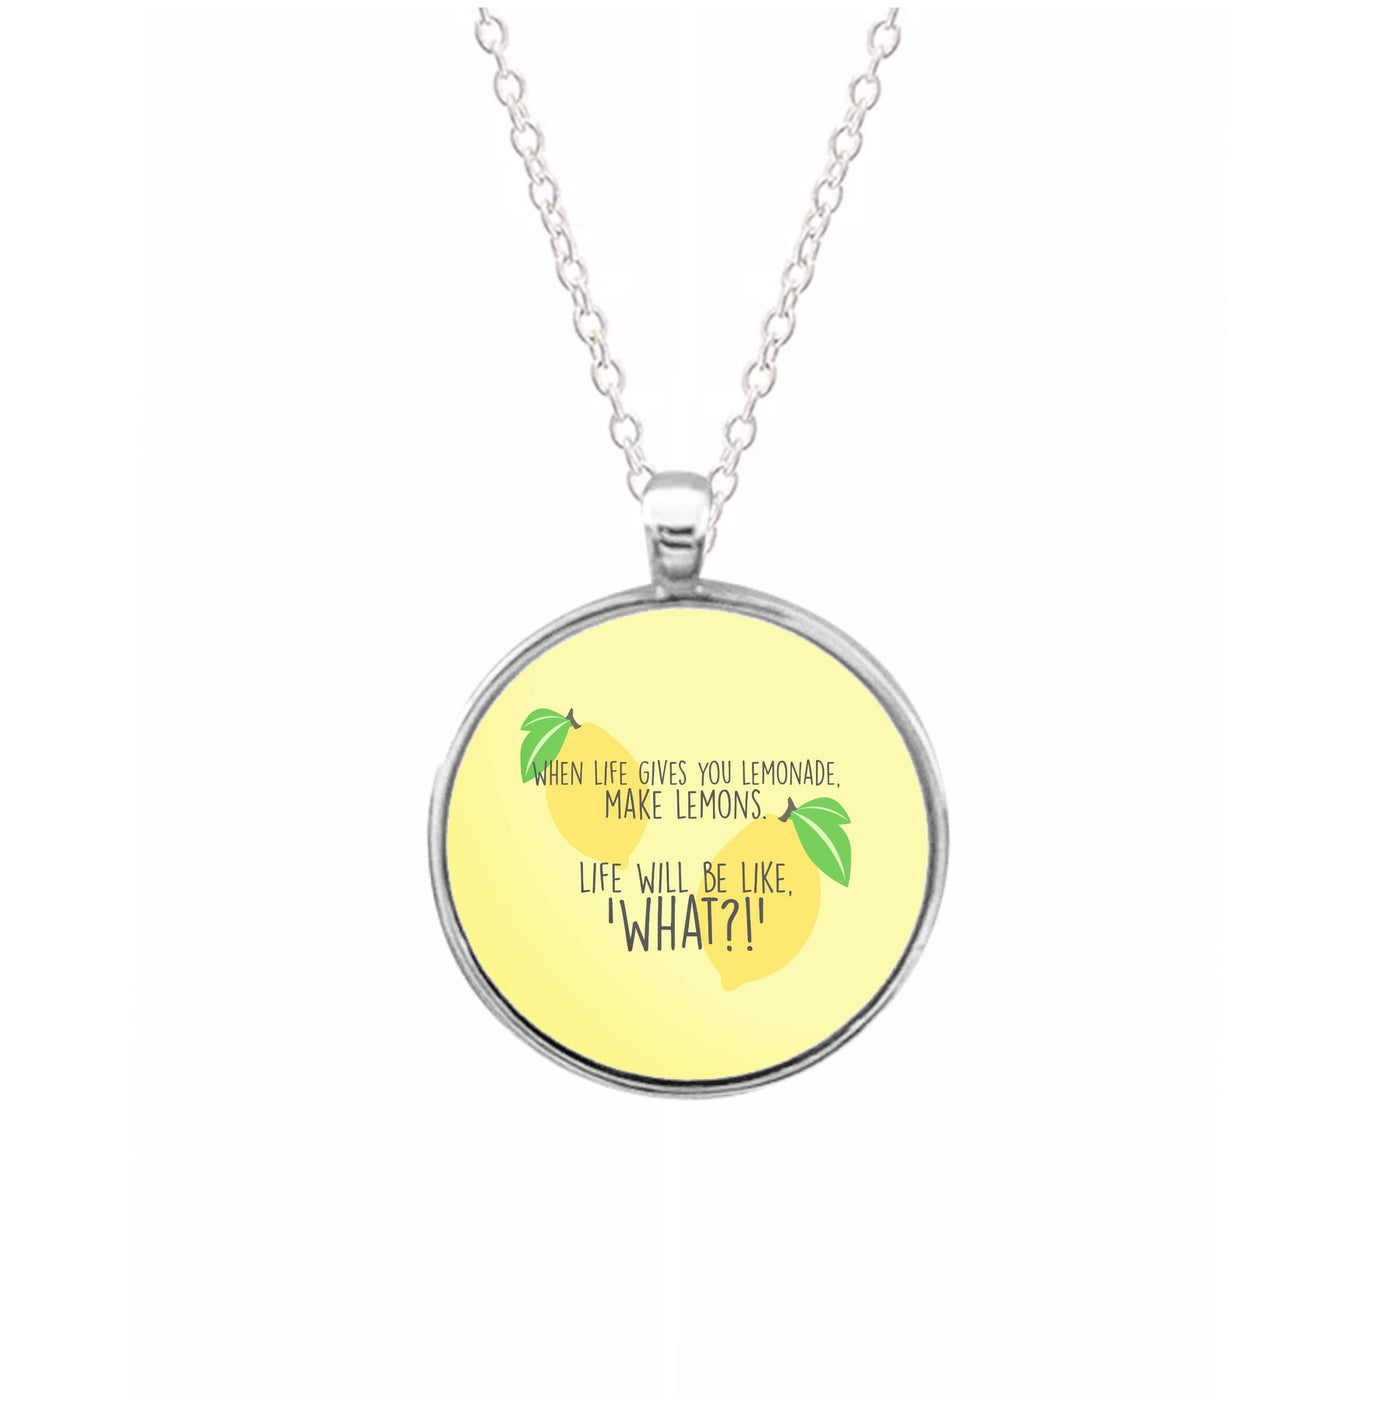 When Life Gives You Lemonade - TV Quotes Necklace